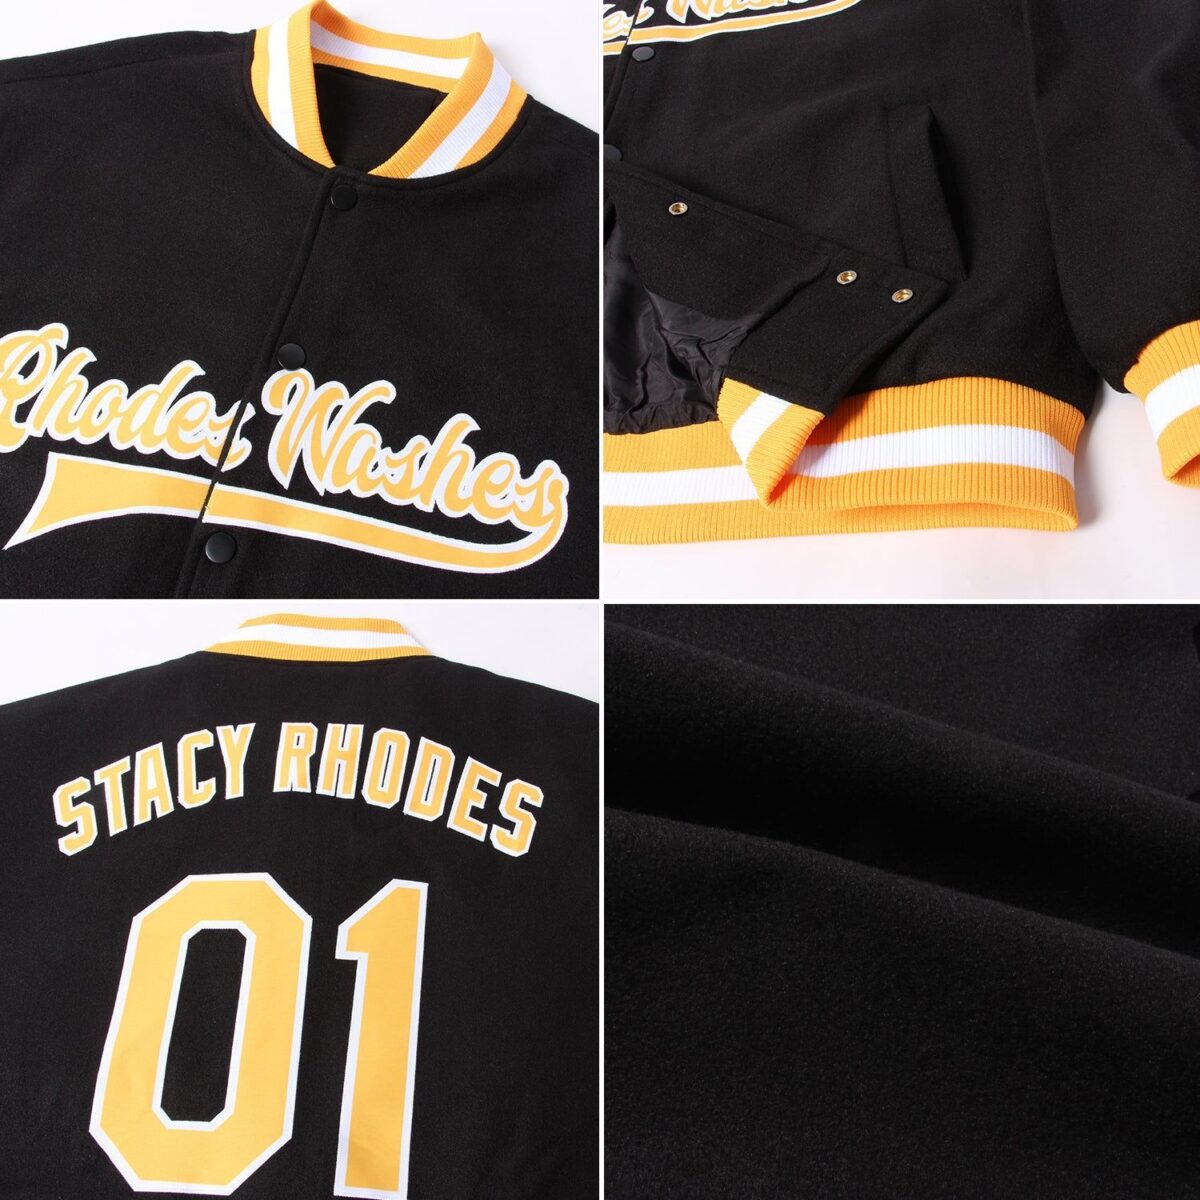 College Student Baseball Jackets with Black & Yellow 2